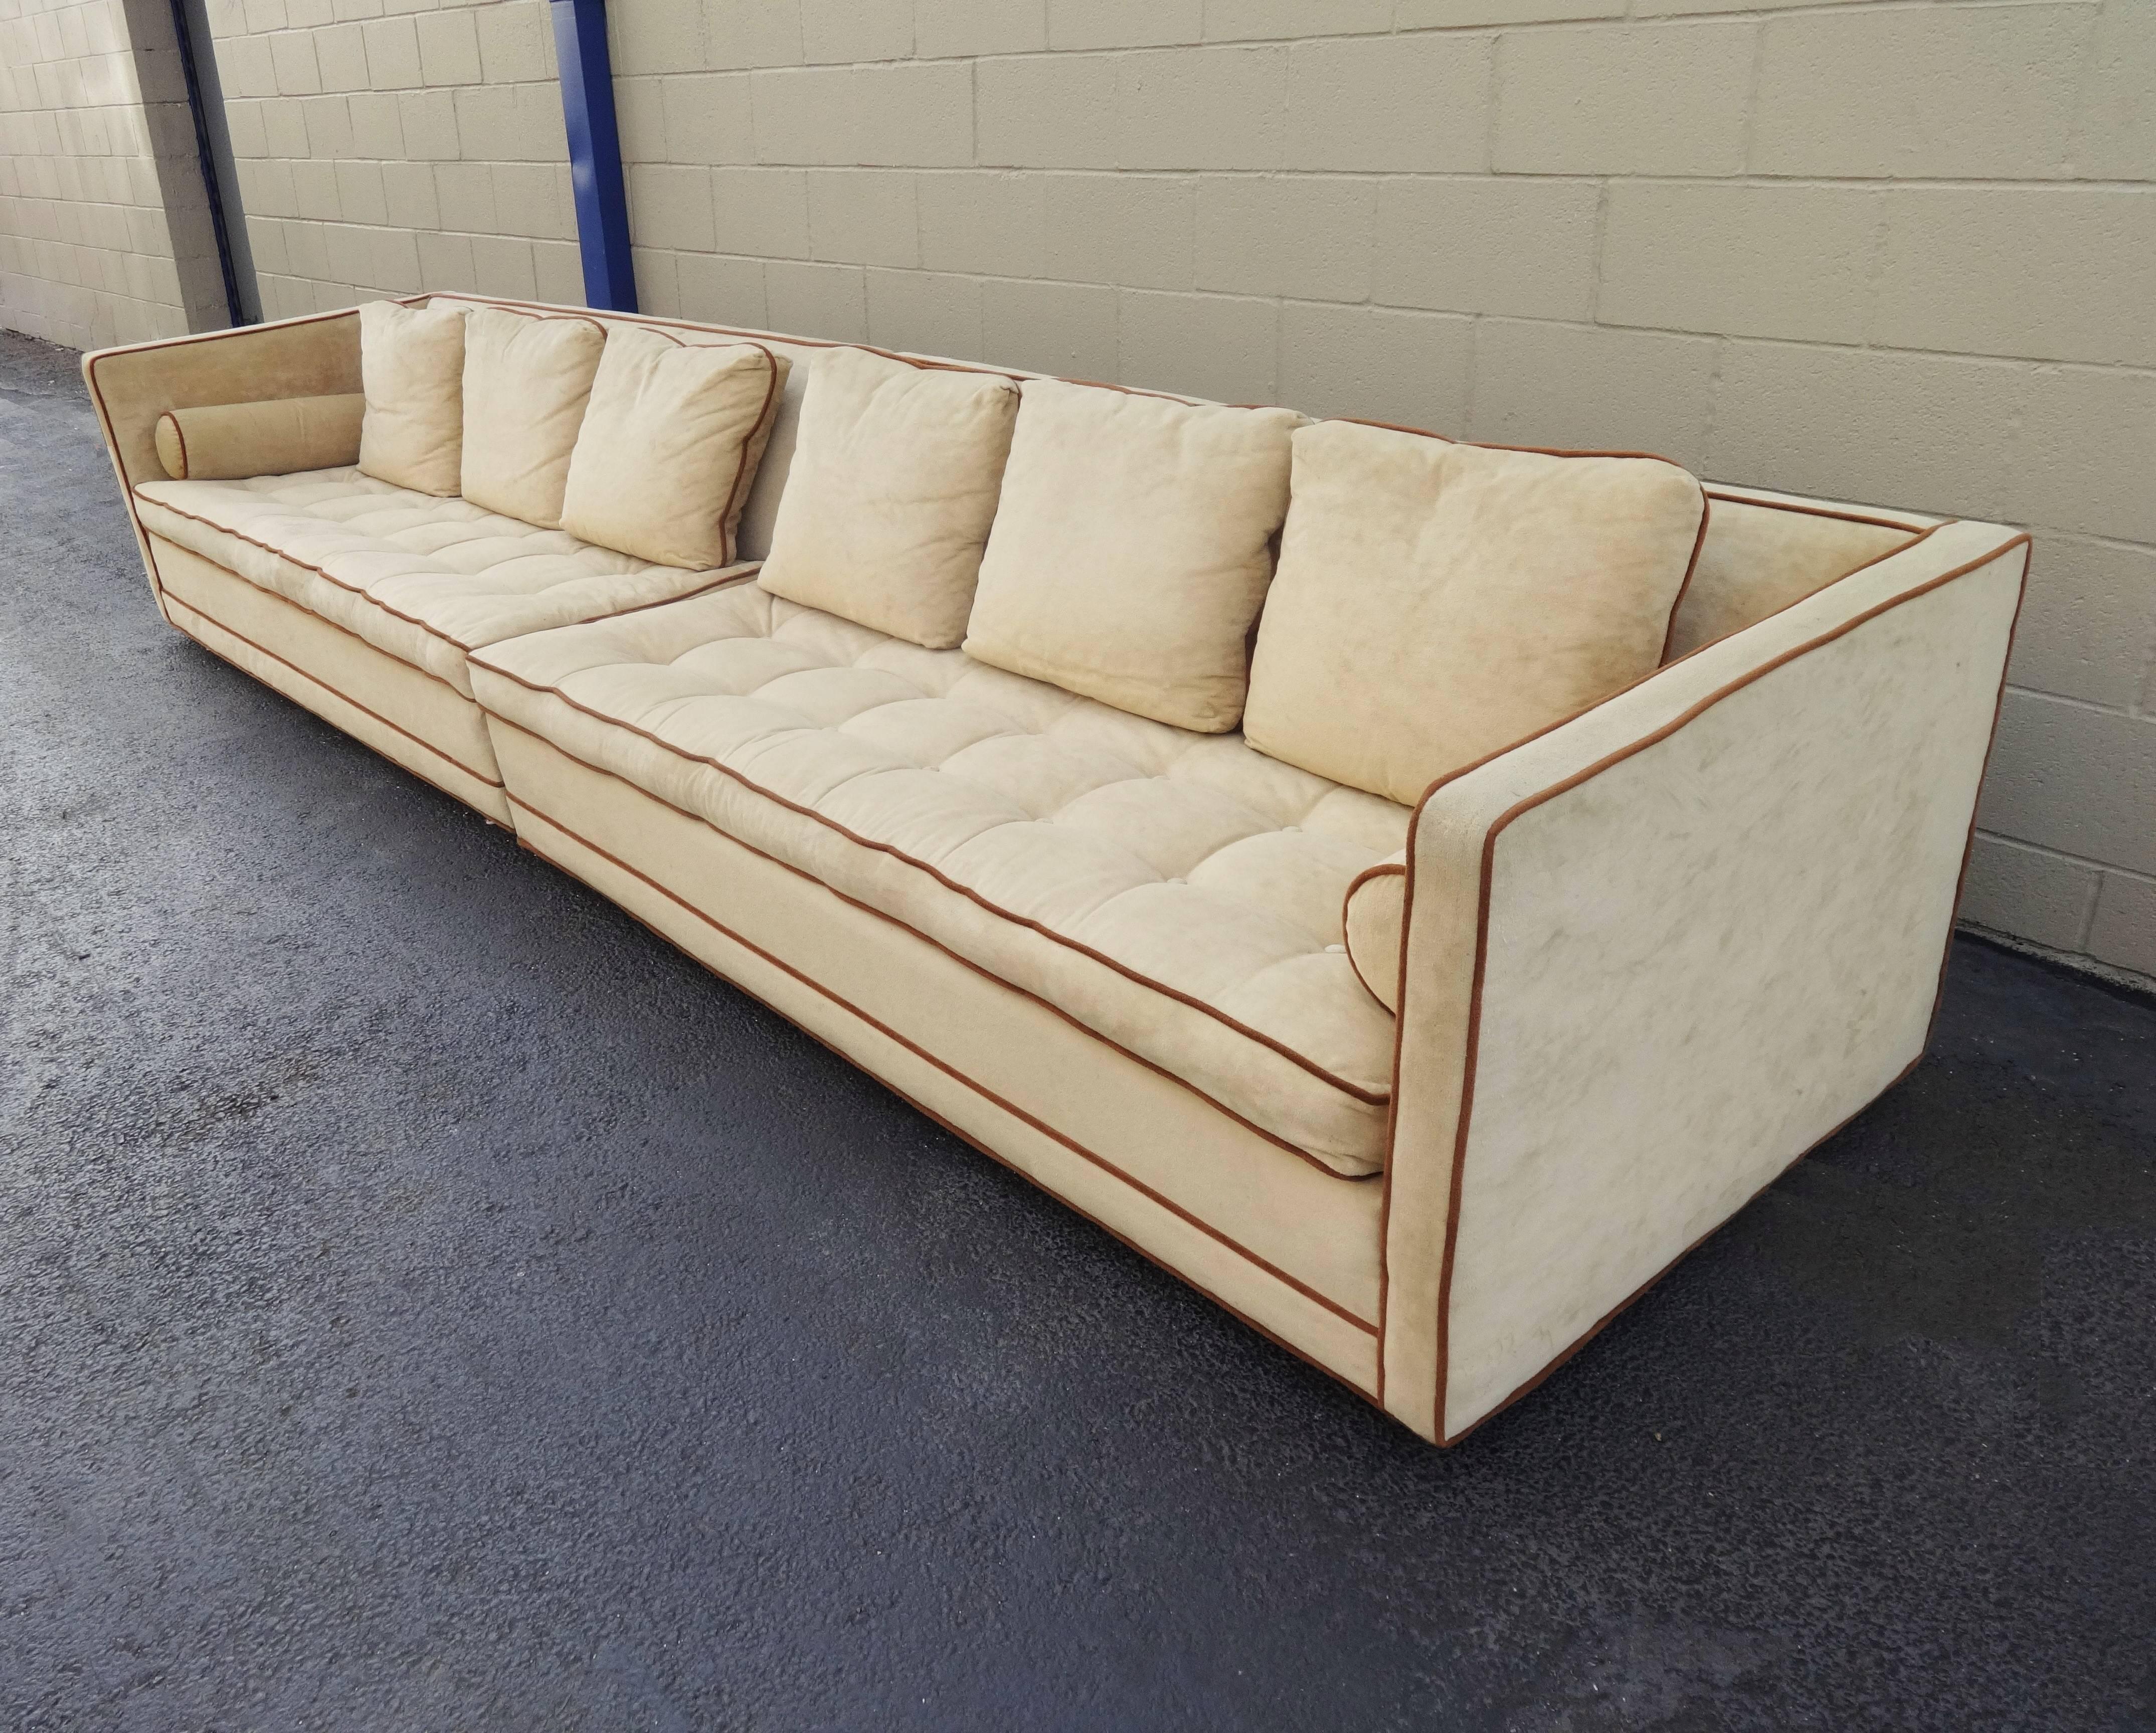 American Stunning Two-Piece Harvey Probber Sectional Sofa For Sale